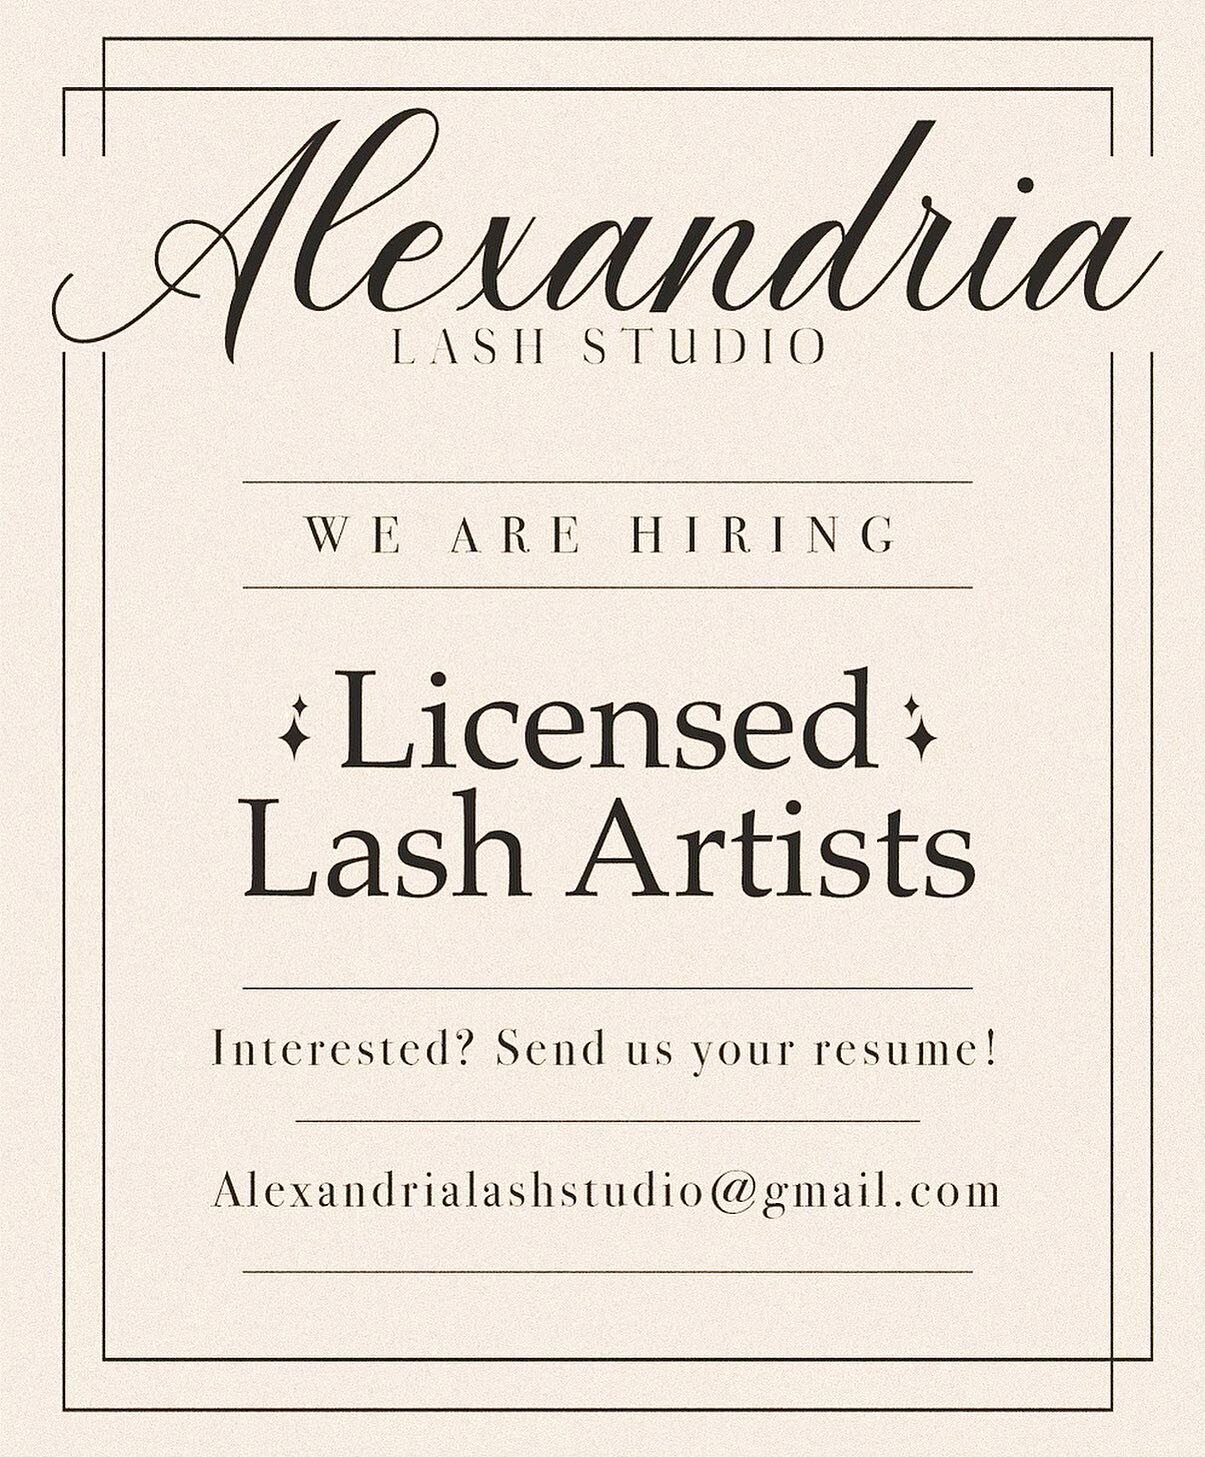 We are looking to add one more artist to our team before busy holiday season starts! Please email us your resume to join our team🤍✨
@jenna.alexandrialashes 
@selena.alexandrialashes 
@brittany.alexandrialashes 
@natalie.alexandrialashes